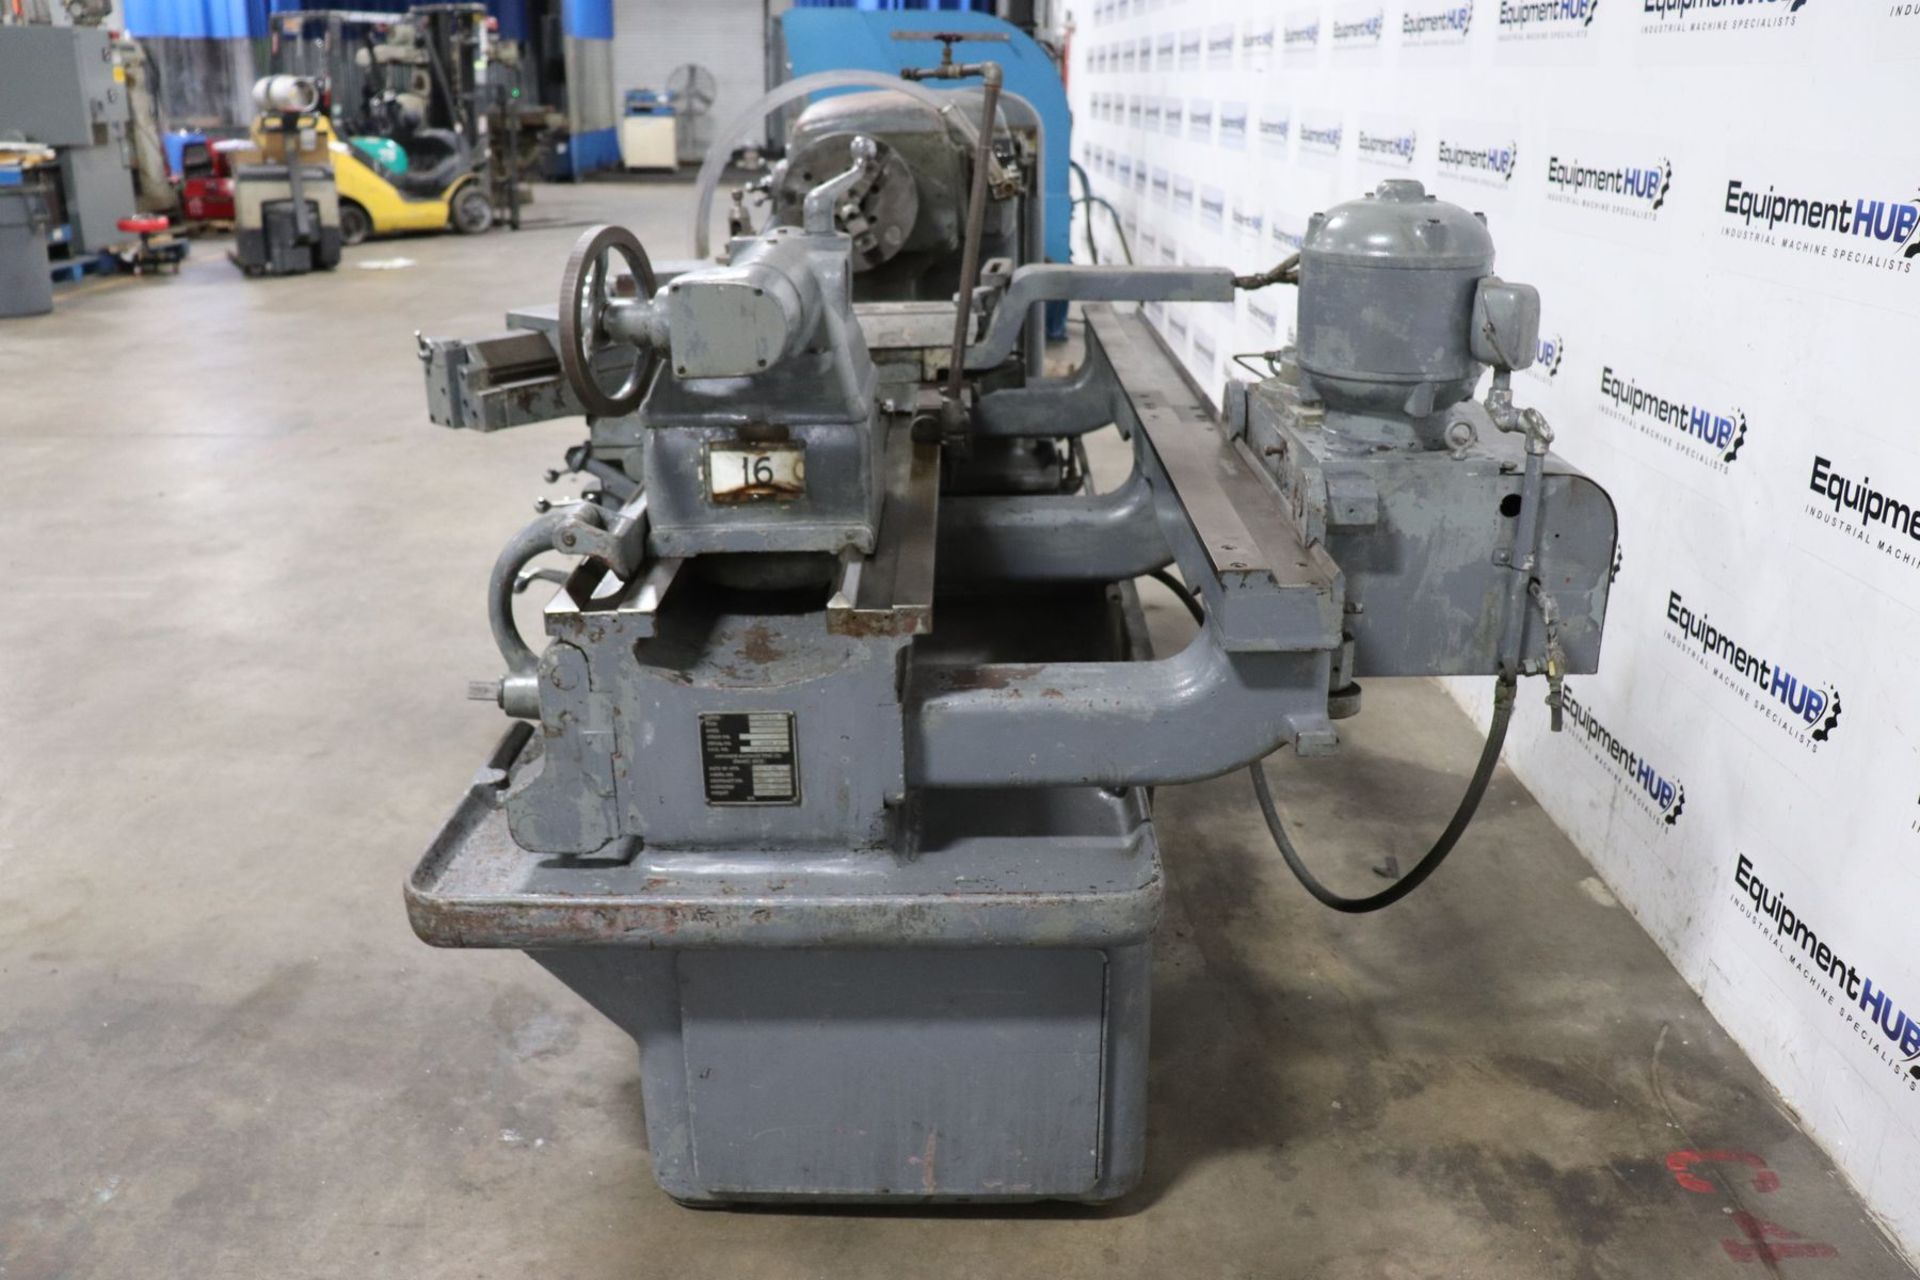 Monarch Model 61 16? / 24? x 54? Engine Lathe with Tracer Attachment - Image 5 of 12